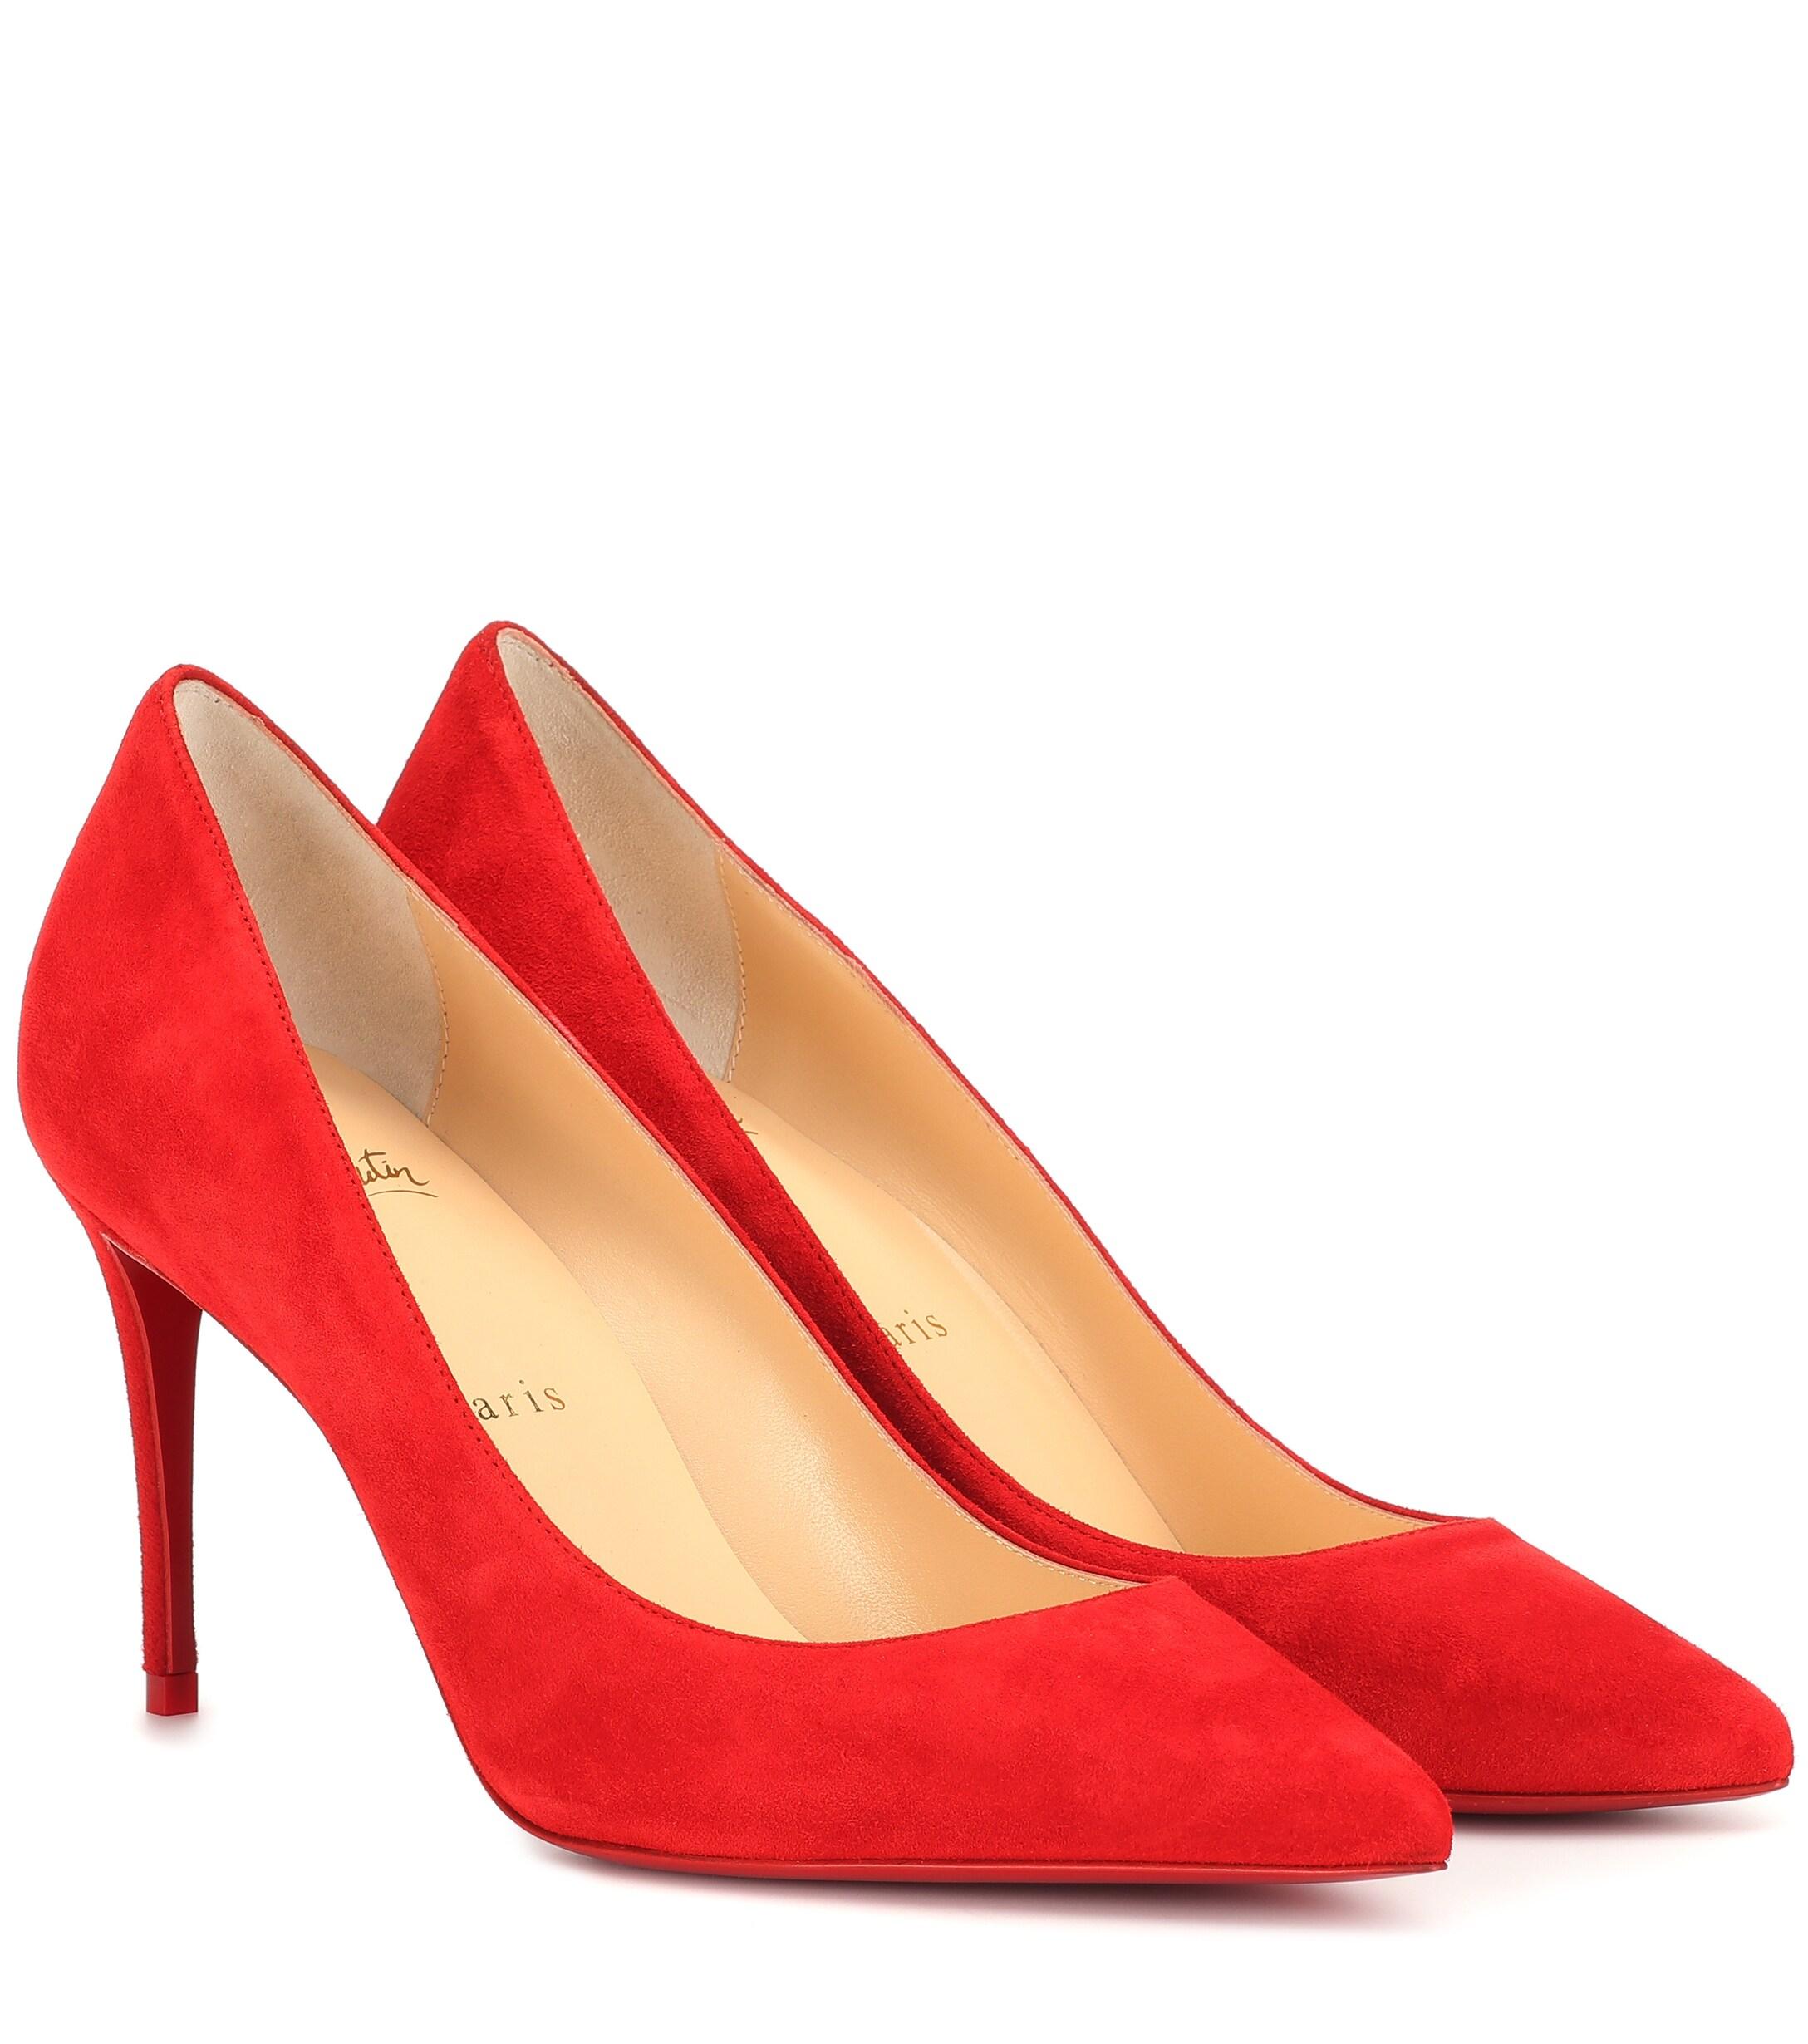 Christian Louboutin Kate 85 Suede Pumps in Red - Lyst